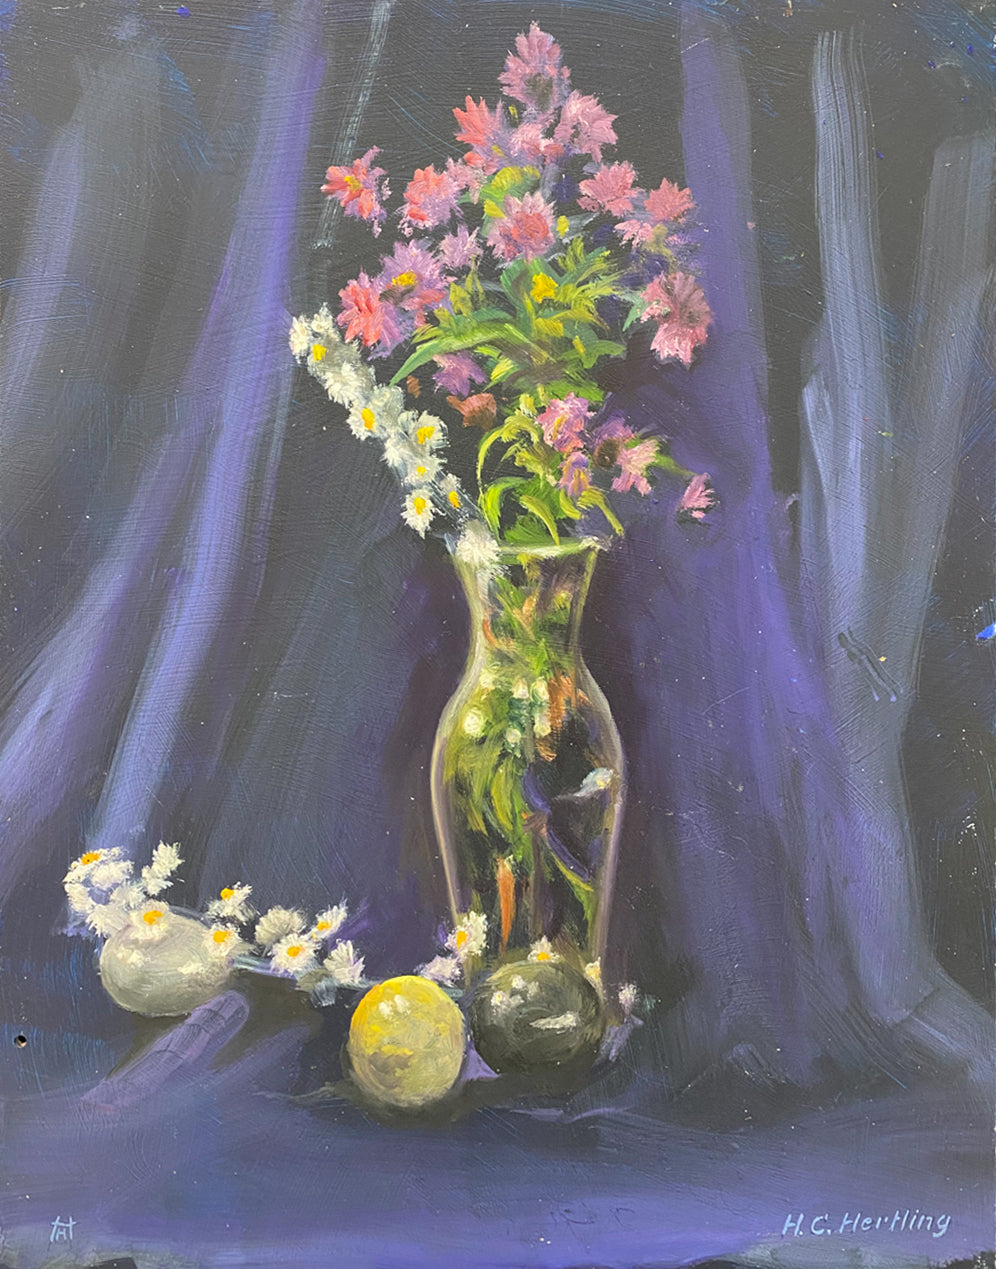 Floral Bouquet. Still life painting by Heiner Hertling.  Oil on board.  